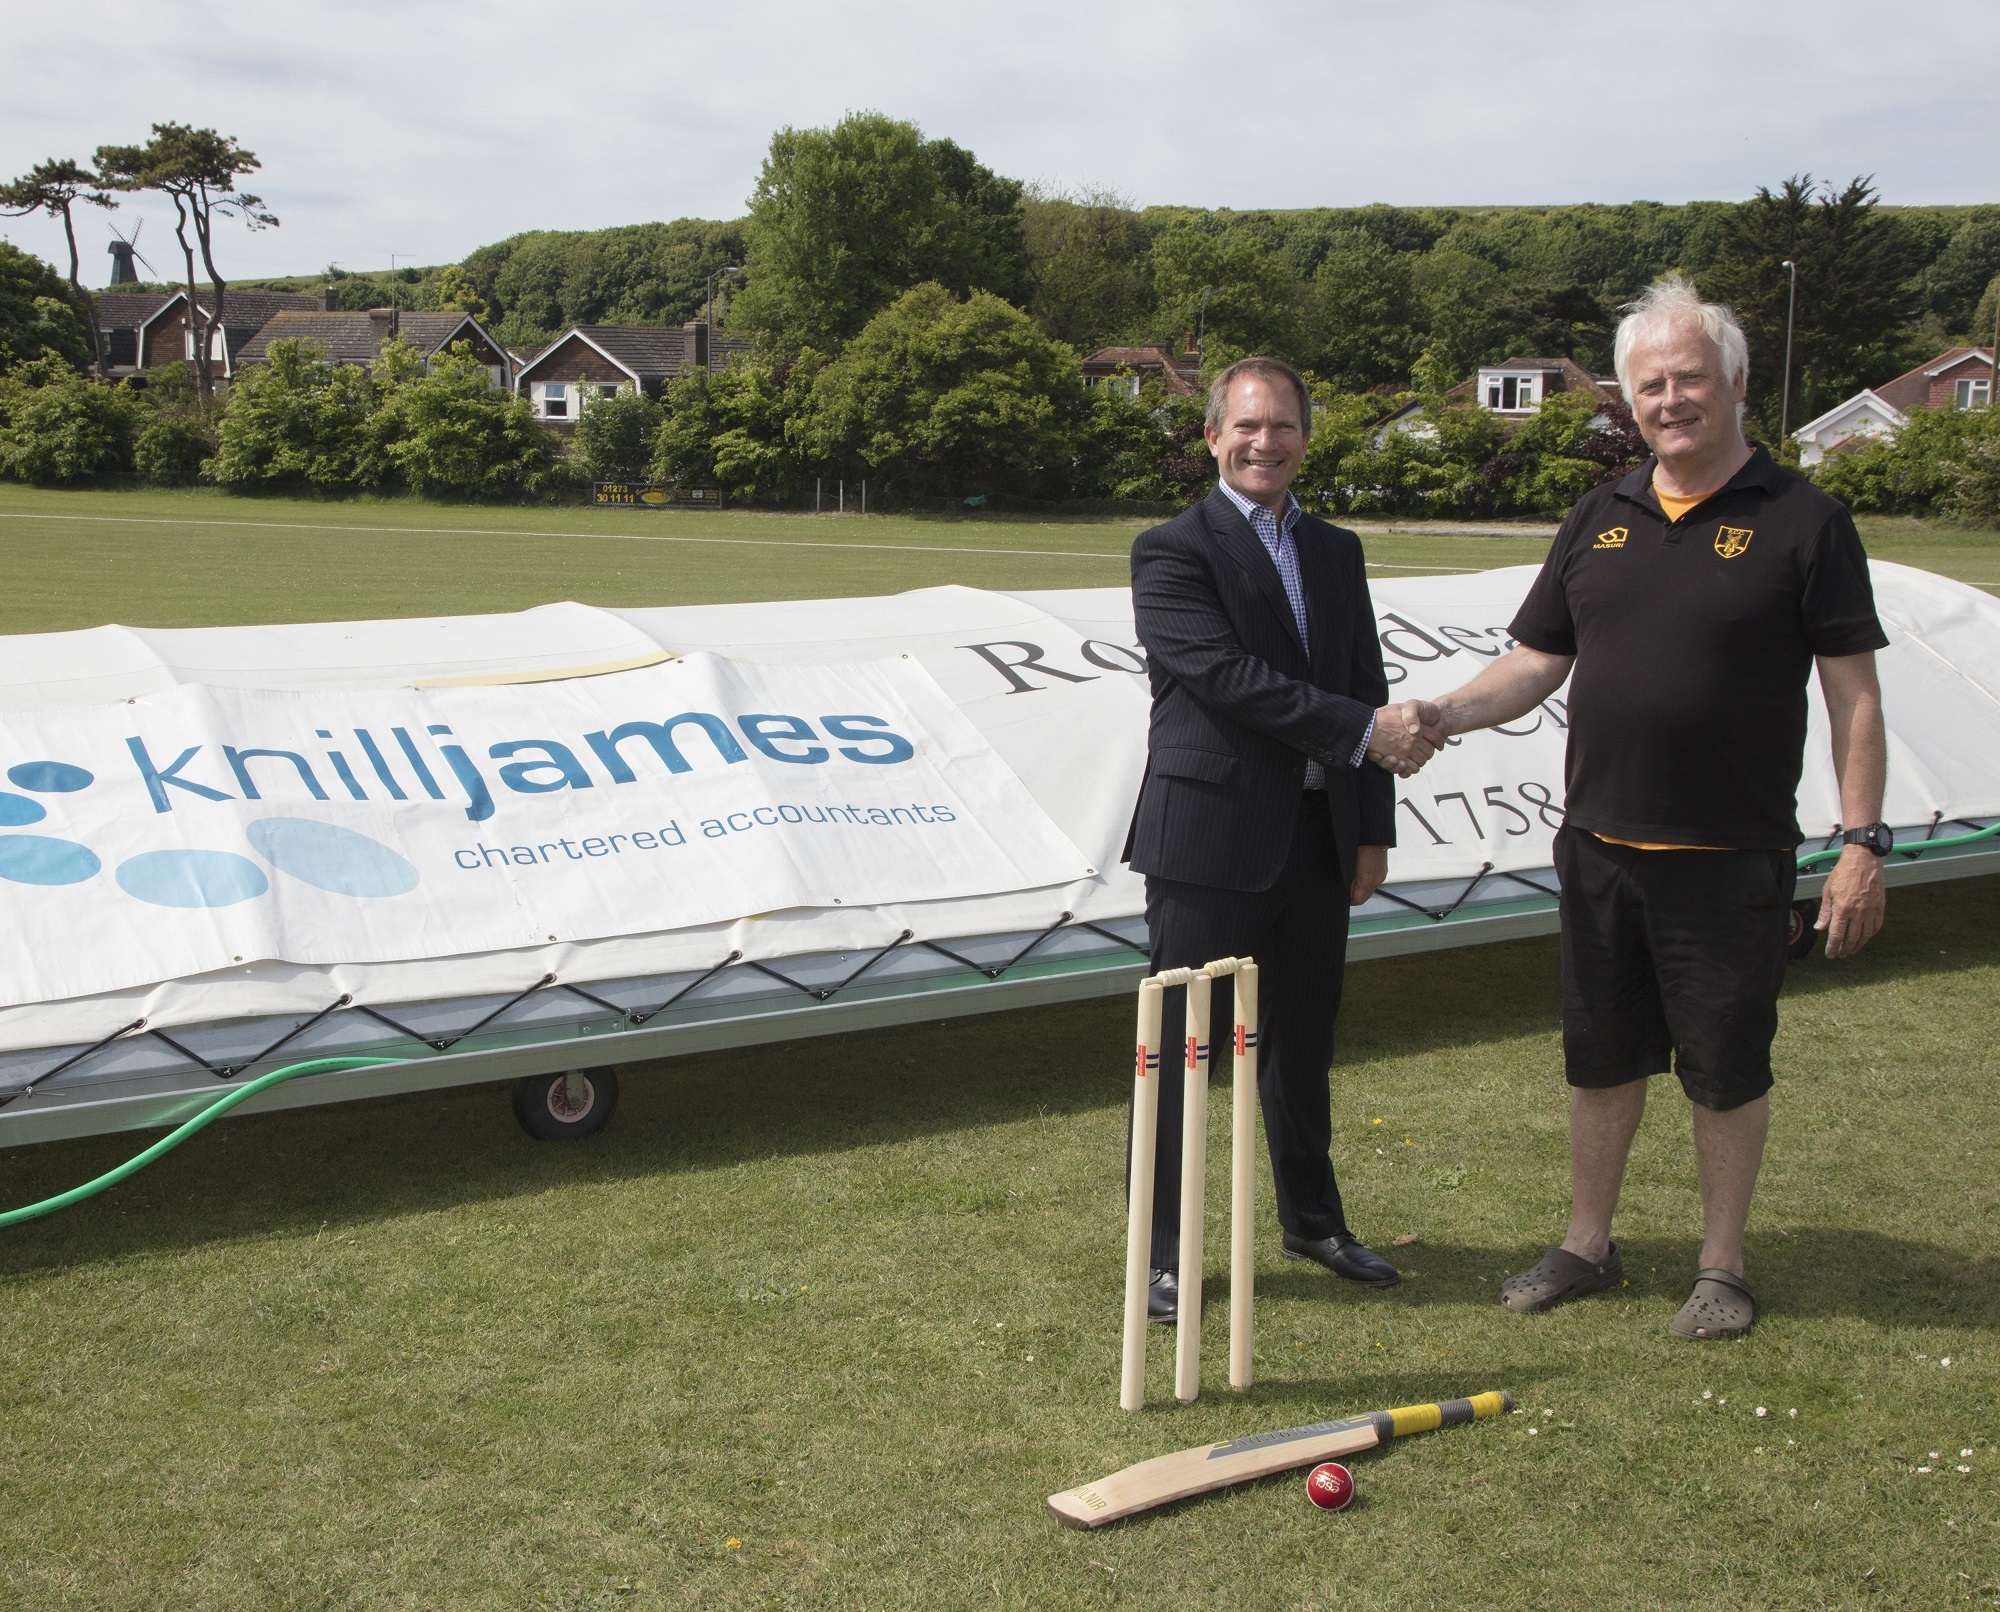 Accountancy firm supports community cricket club